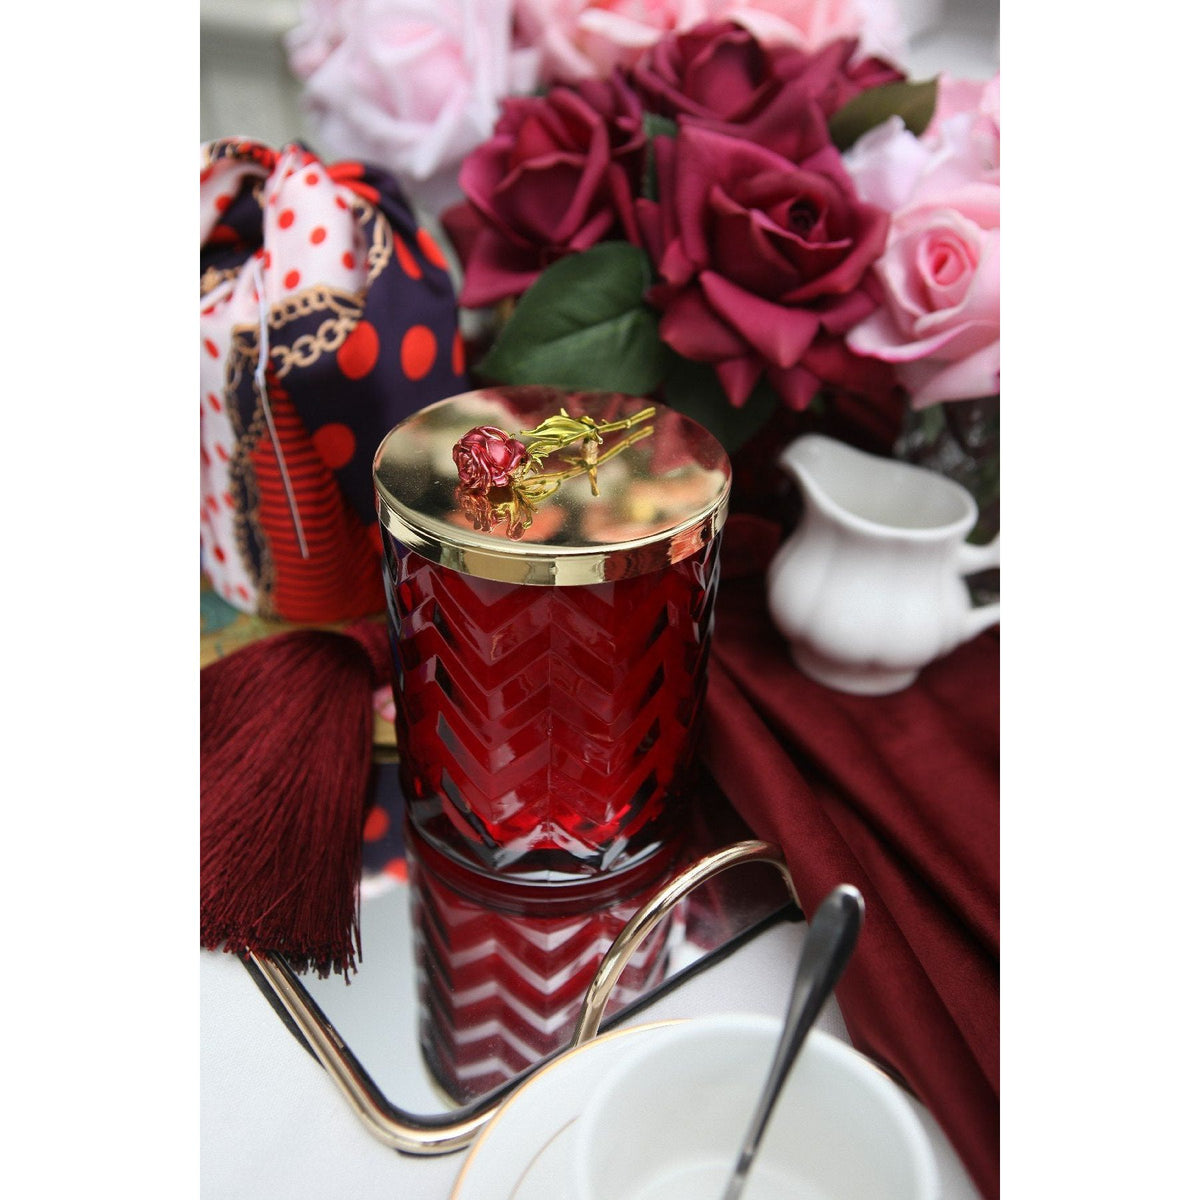 COTE NOIRE |HERRINGBONE CANDLE WITH SCARF ROSE OUD - RED &amp; RED ROSE LID